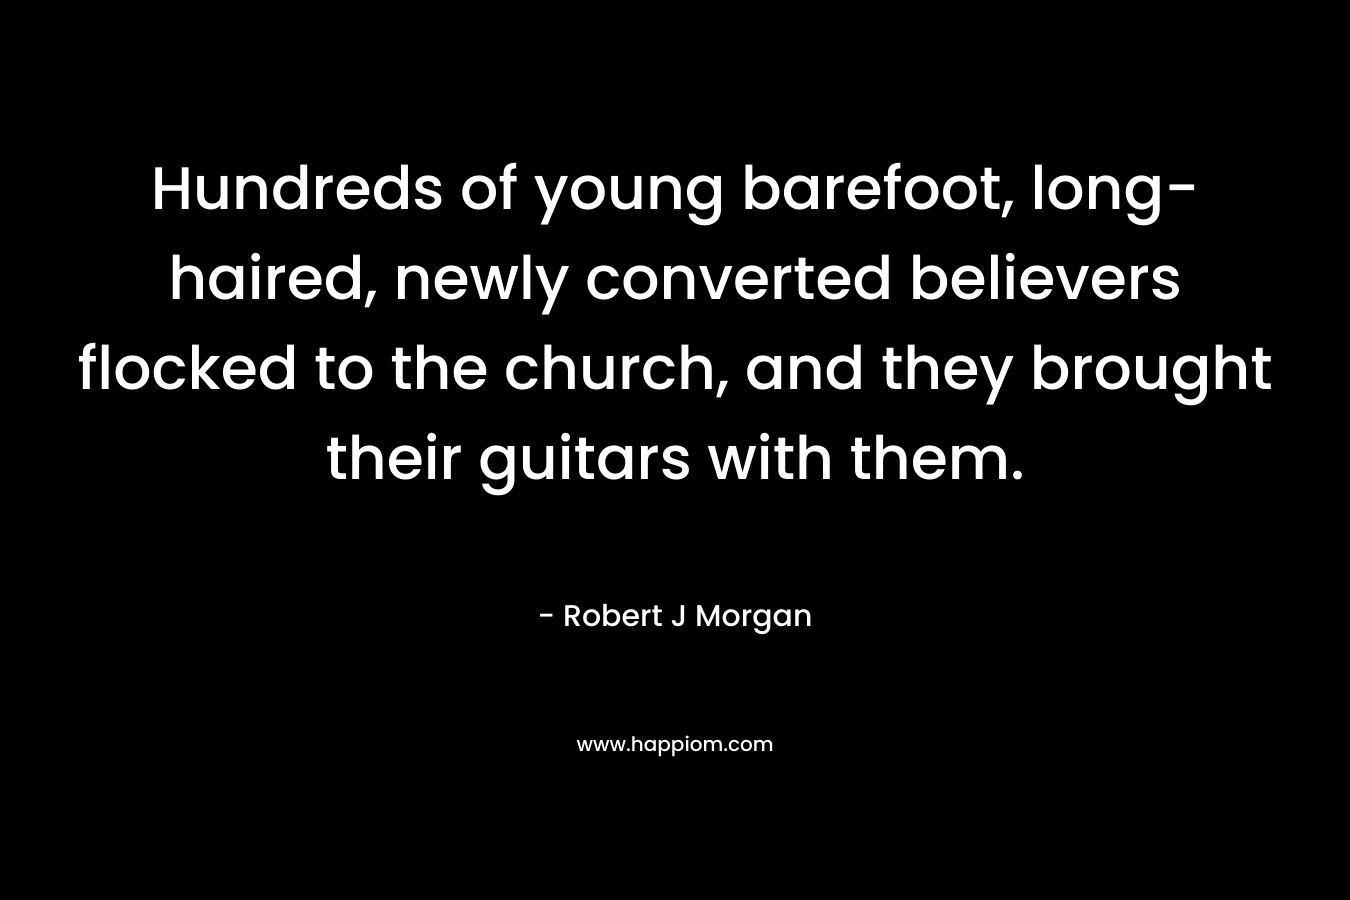 Hundreds of young barefoot, long-haired, newly converted believers flocked to the church, and they brought their guitars with them.